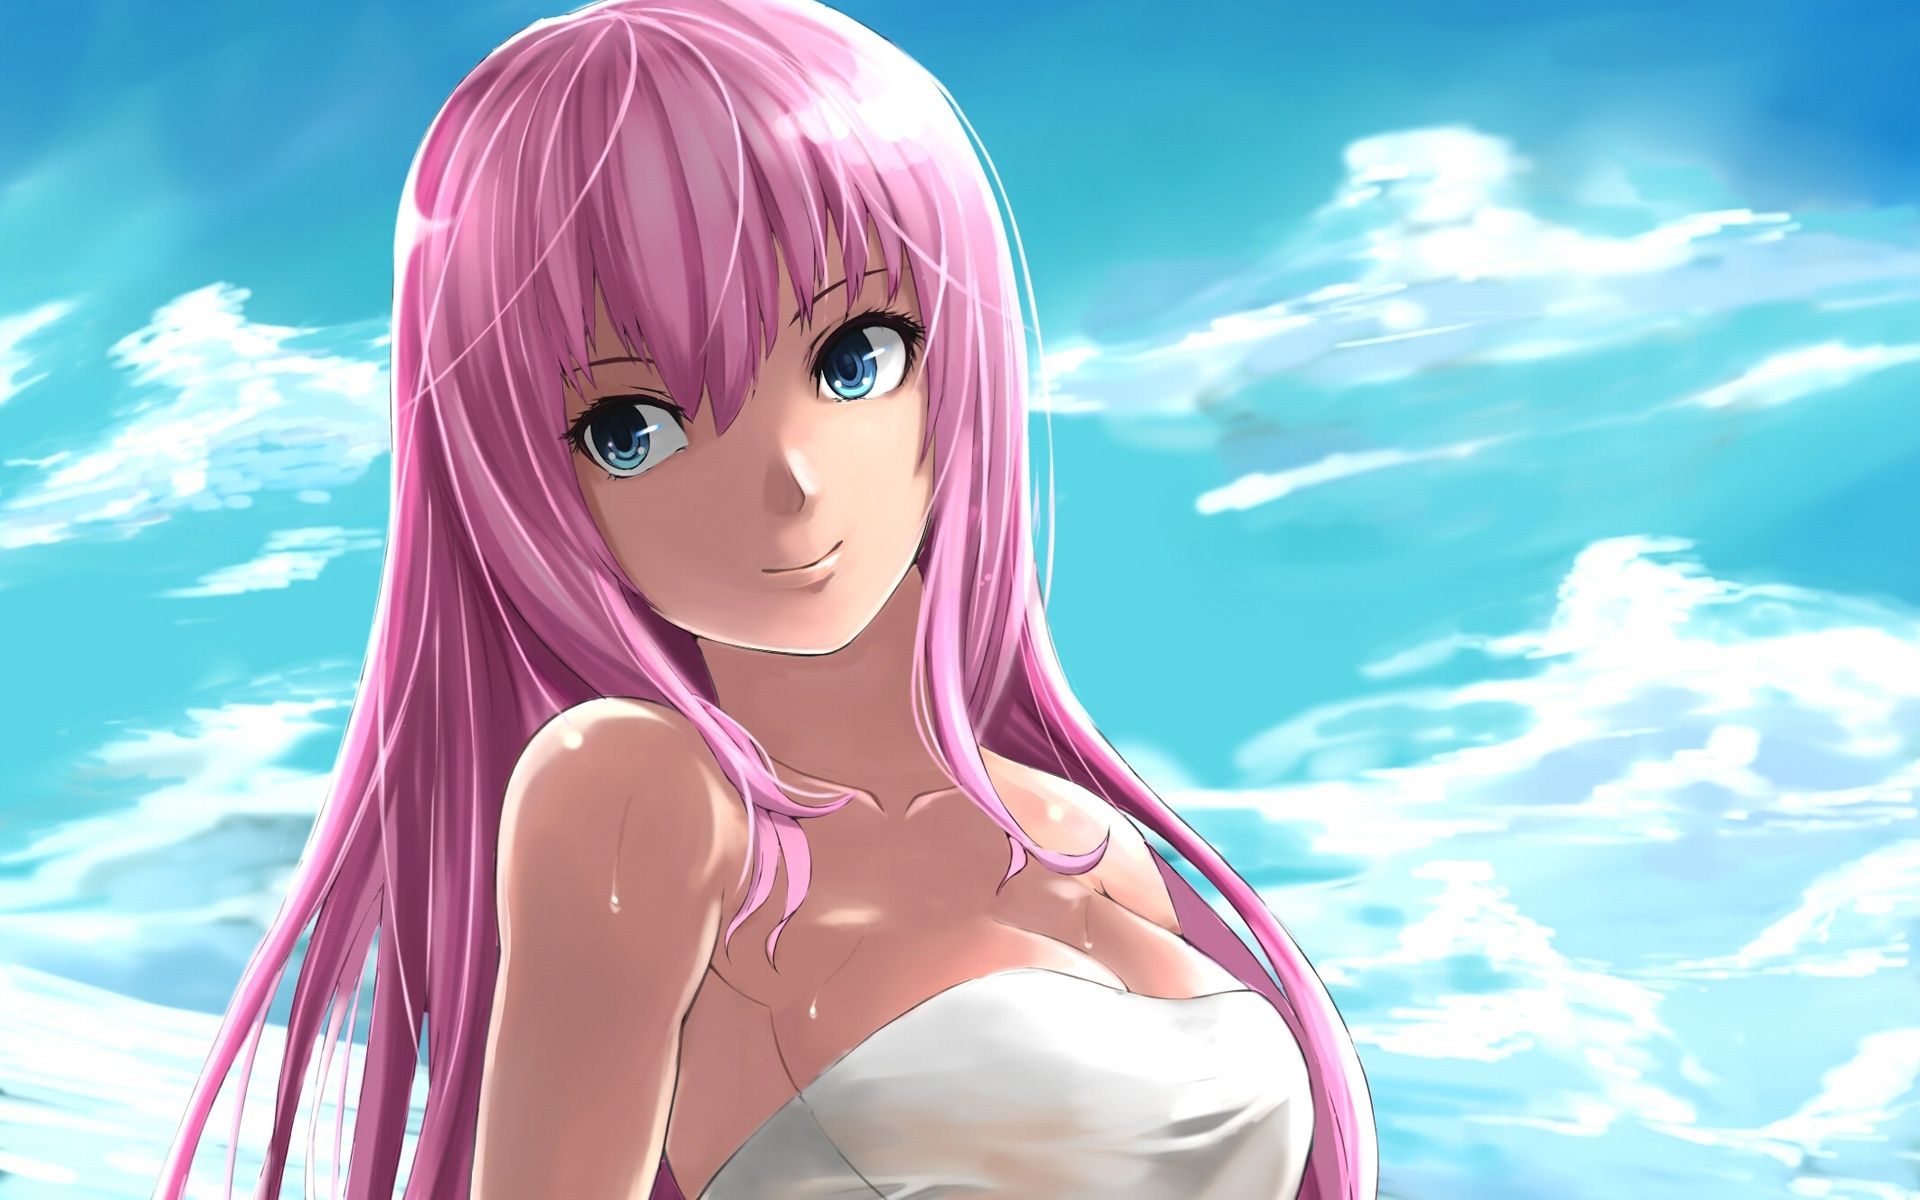 Lexica - Anime style painting of side view girl smiling with open mouth,  eyes closed